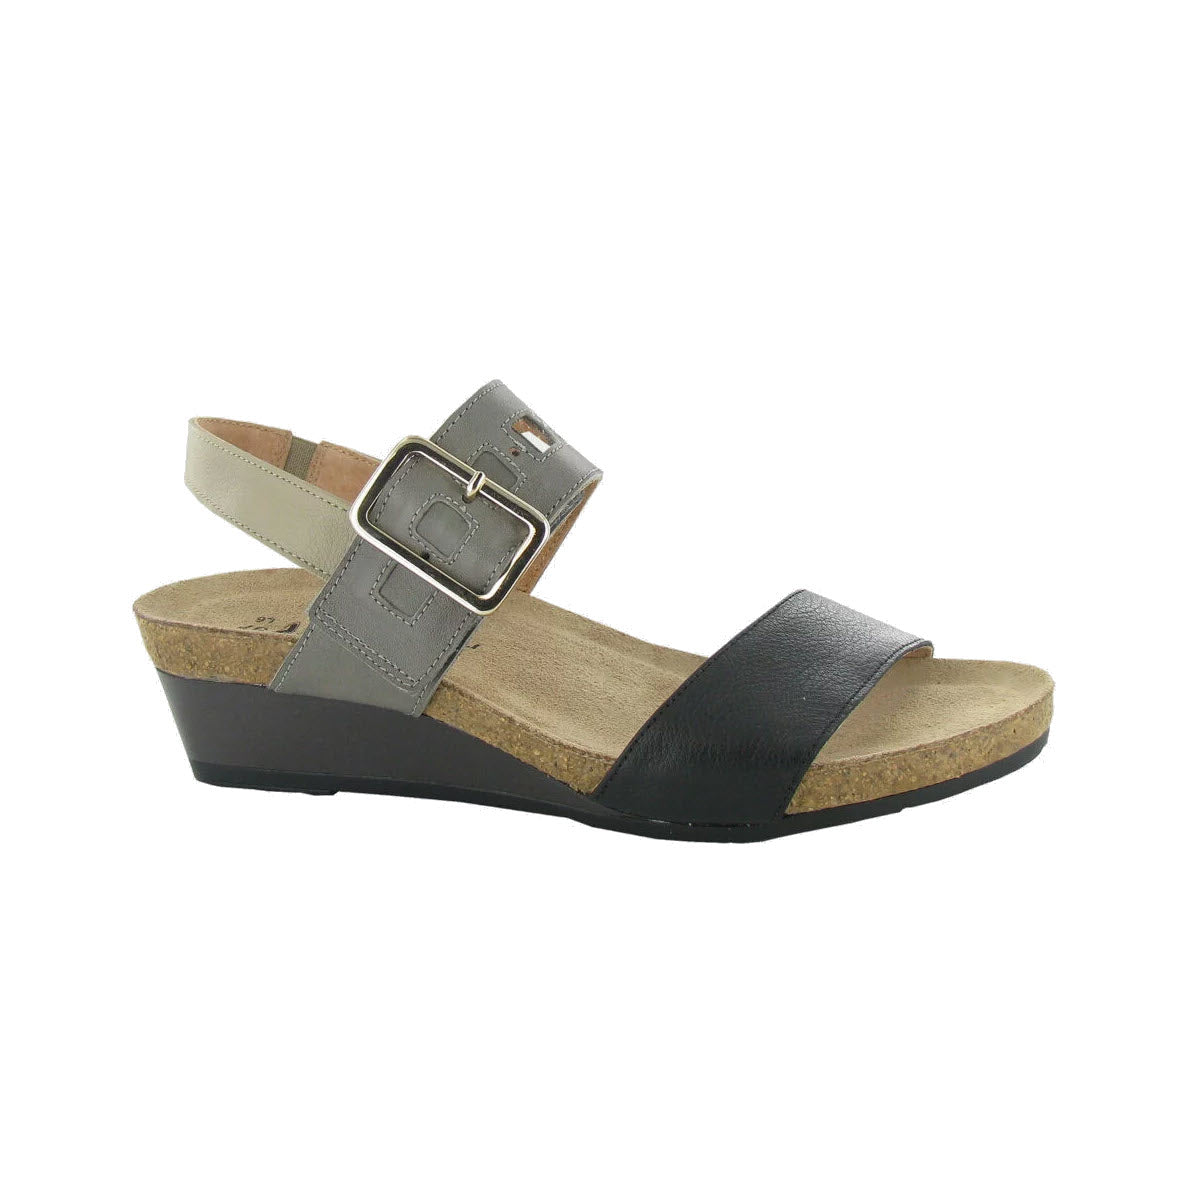 Black and gray Naot women&#39;s wedge sandals with a hook and loop closure, displayed on a white background.